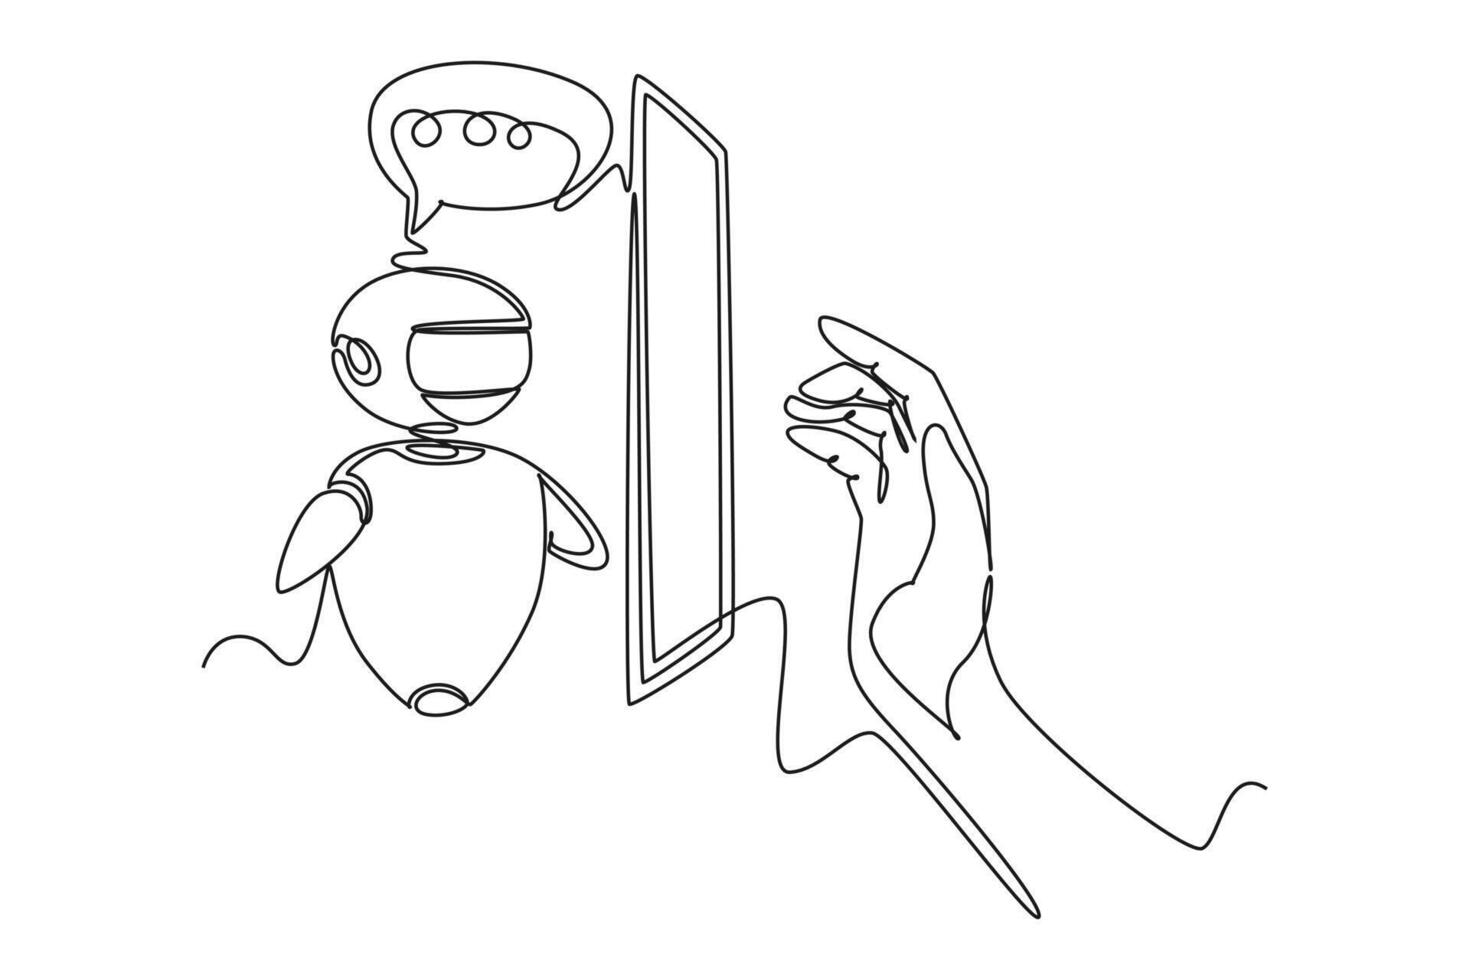 Continuous one line drawing Online communication with chat bot concept. Doodle illustration. vector